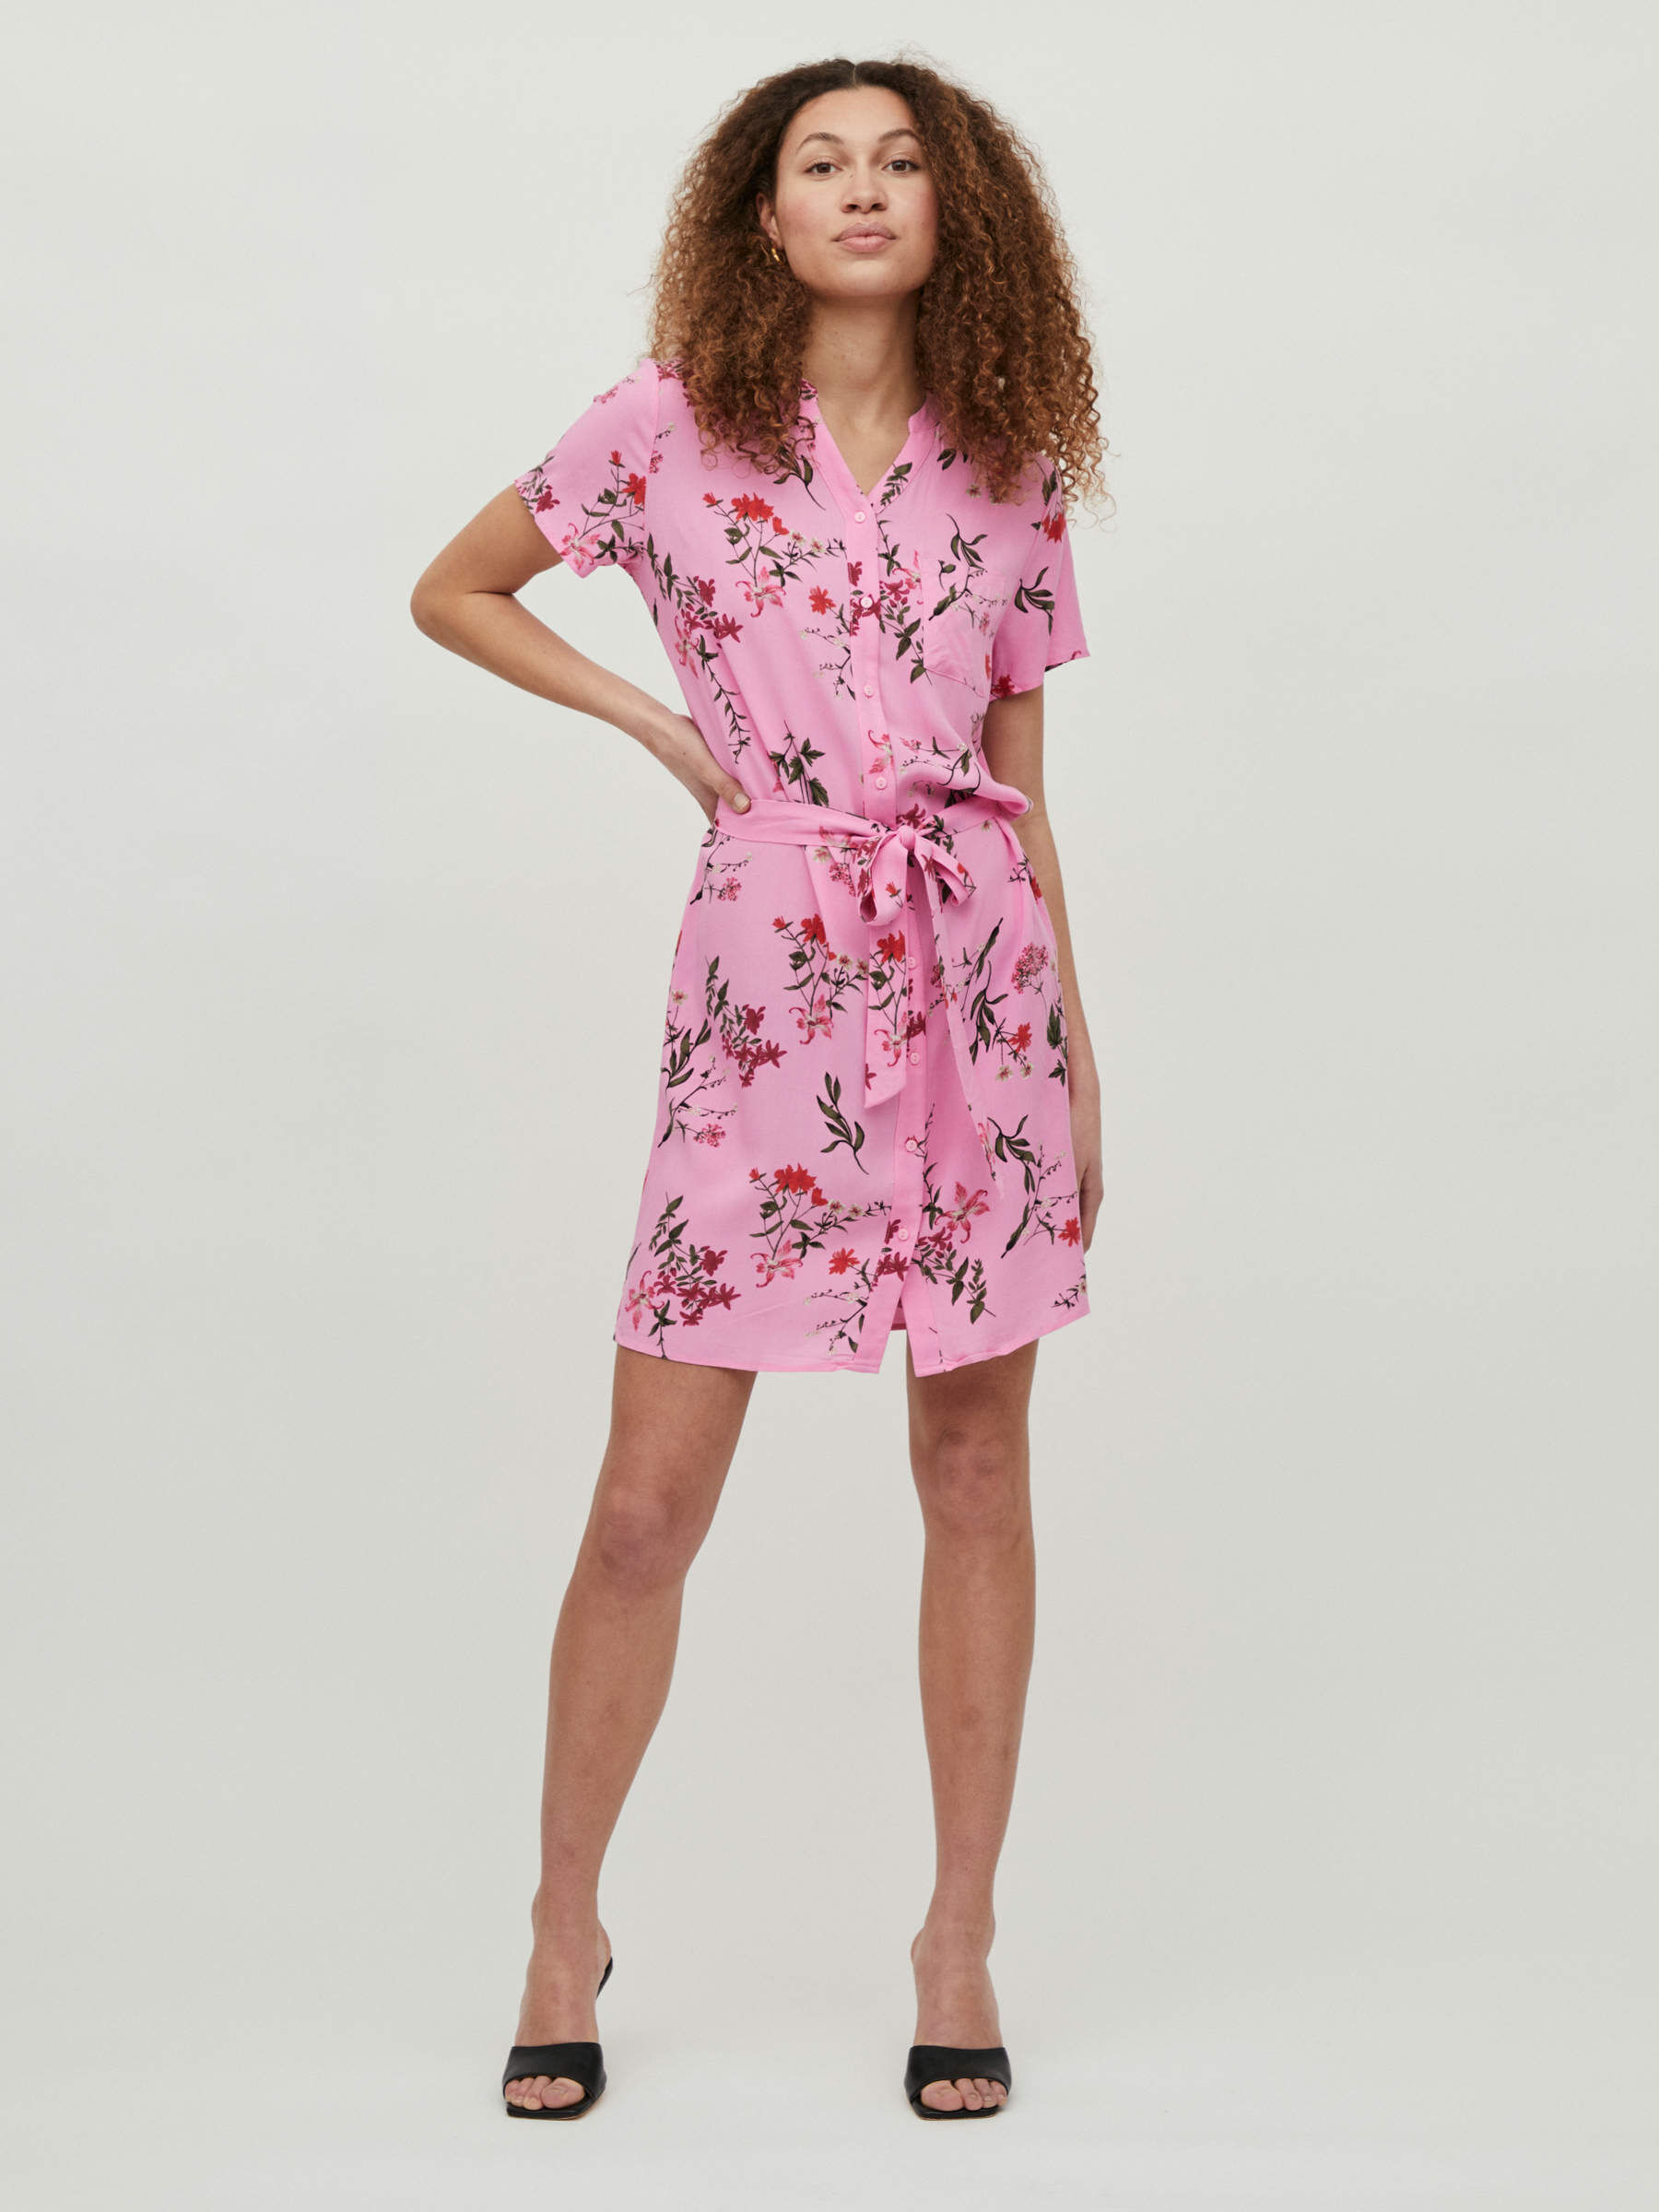 À MANCHES COURTES ROBE-CHEMISE (Pink ...